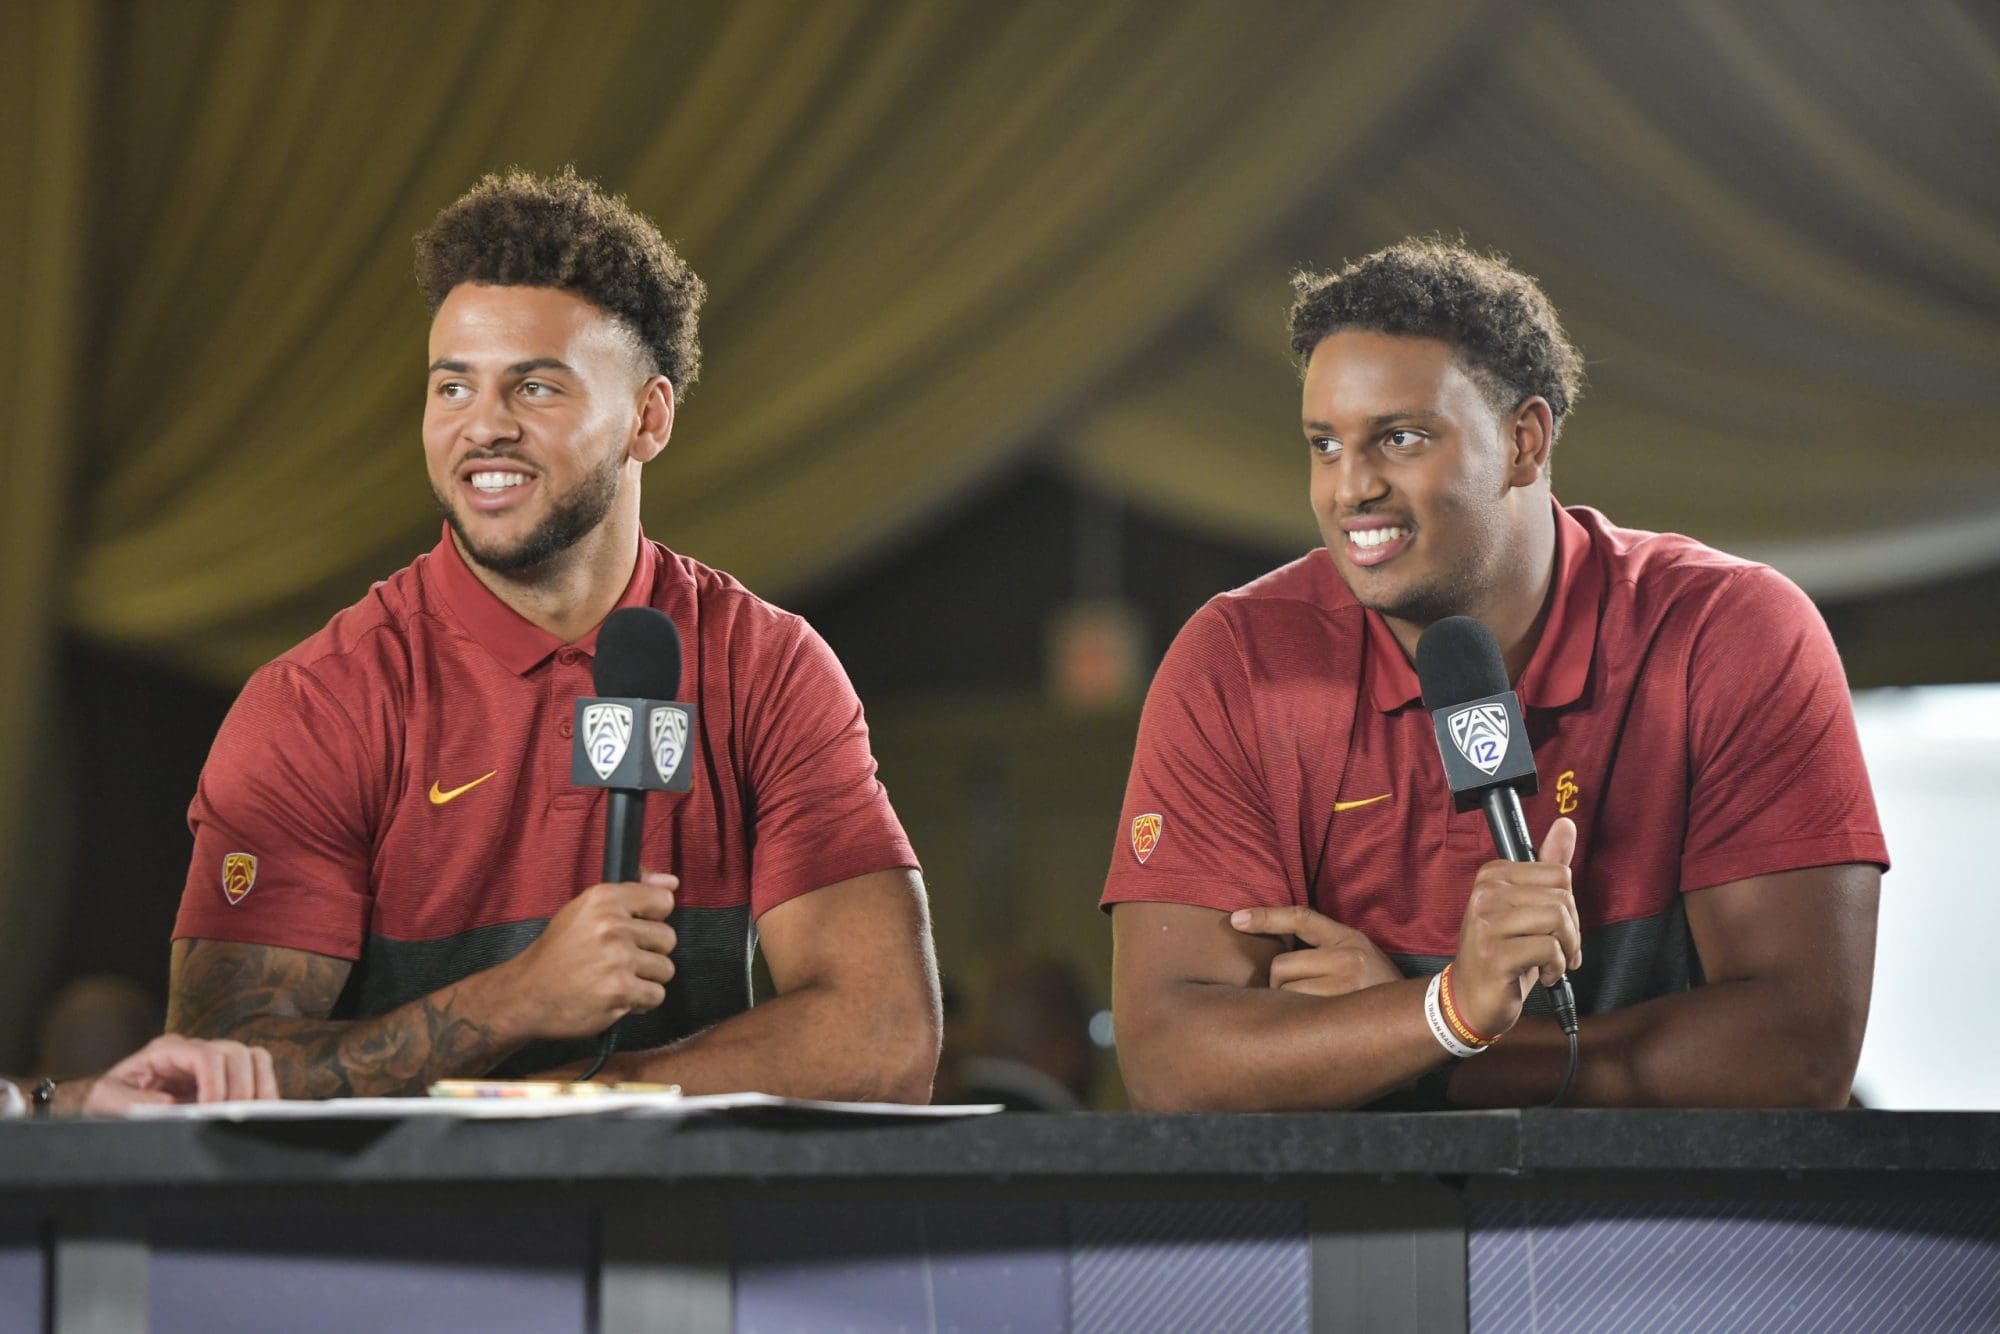 Two smiling athletes in red sports jerseys sit at a table holding microphones, engaged in a discussion during a media event under a large tent.